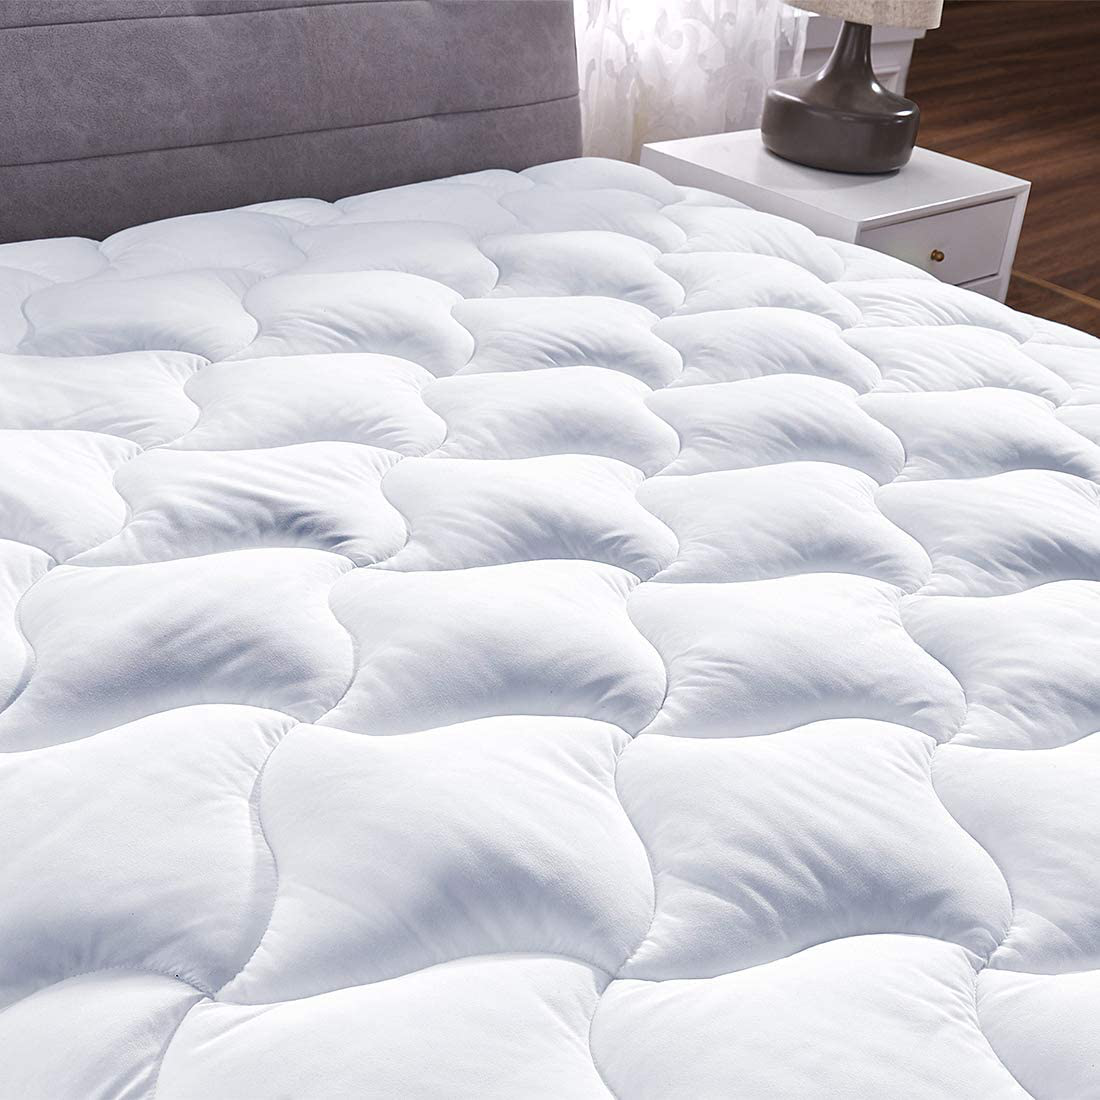 King Mattress Pad Cover Pillowtop Overfilled Cooling 8-21 Inch Deep Pocket Quilted Fitted Bed Topper with Sonw Down Alternative